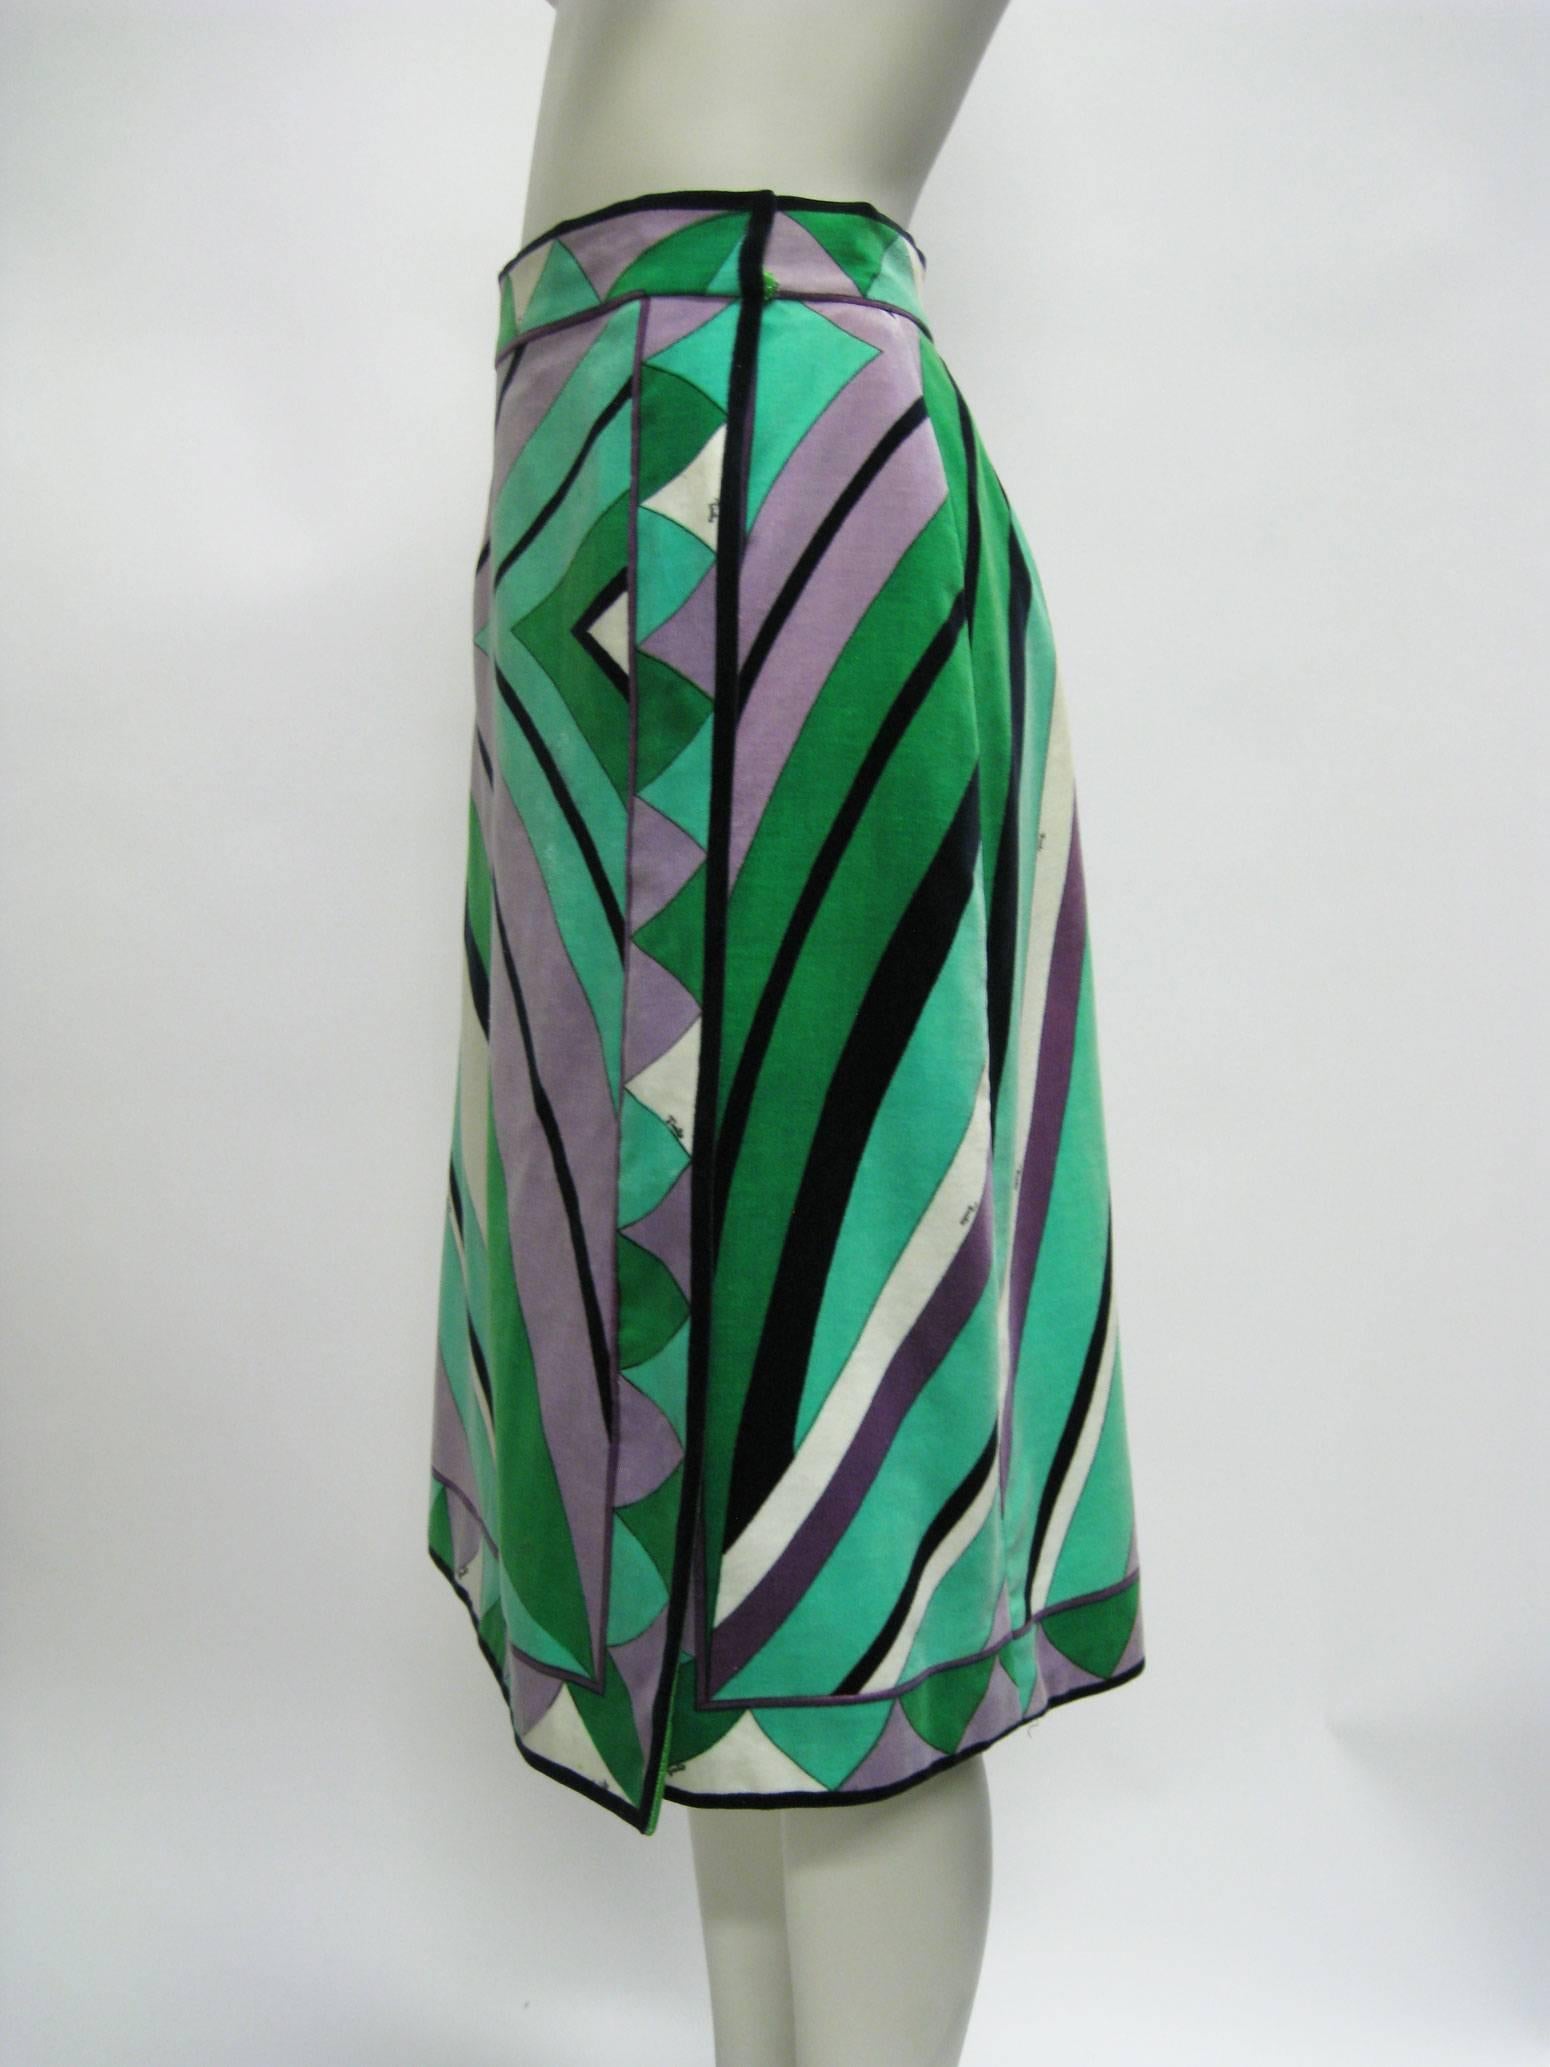 Vintage Emilio Pucci silk velvet skirt.
Wrap style.
Vibrant greens, purples, black and white geometric design.
Hidden button closure on side.
Lined.
Tagged a US vintage size 12.
